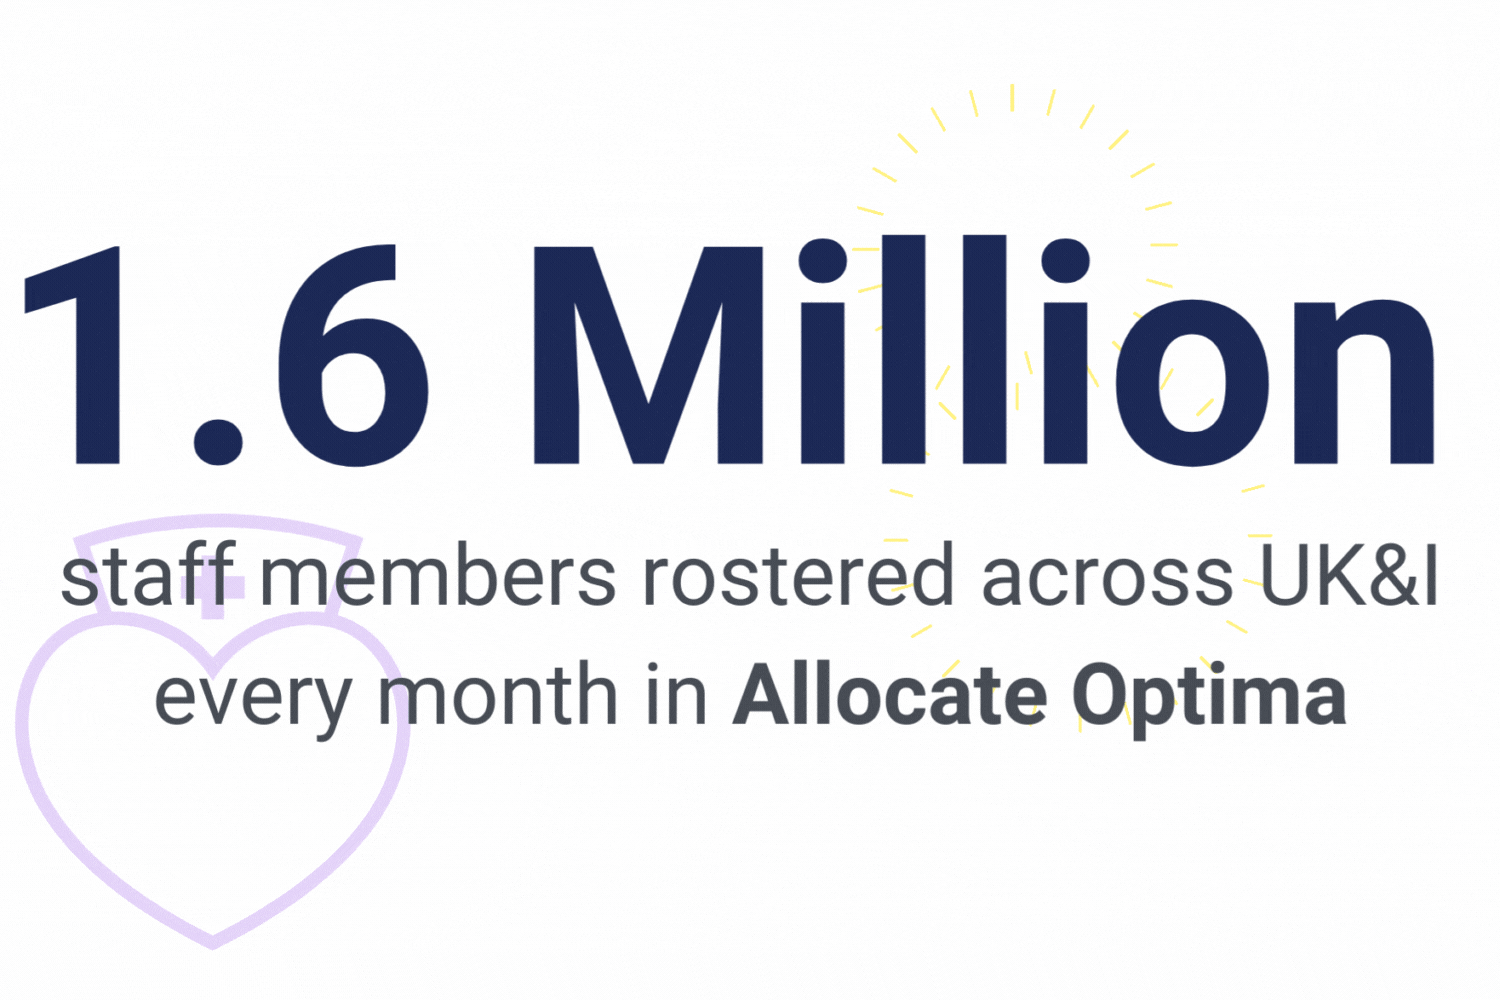 1.6 Million staff members rostered across UK&I every month in Allocate Optima